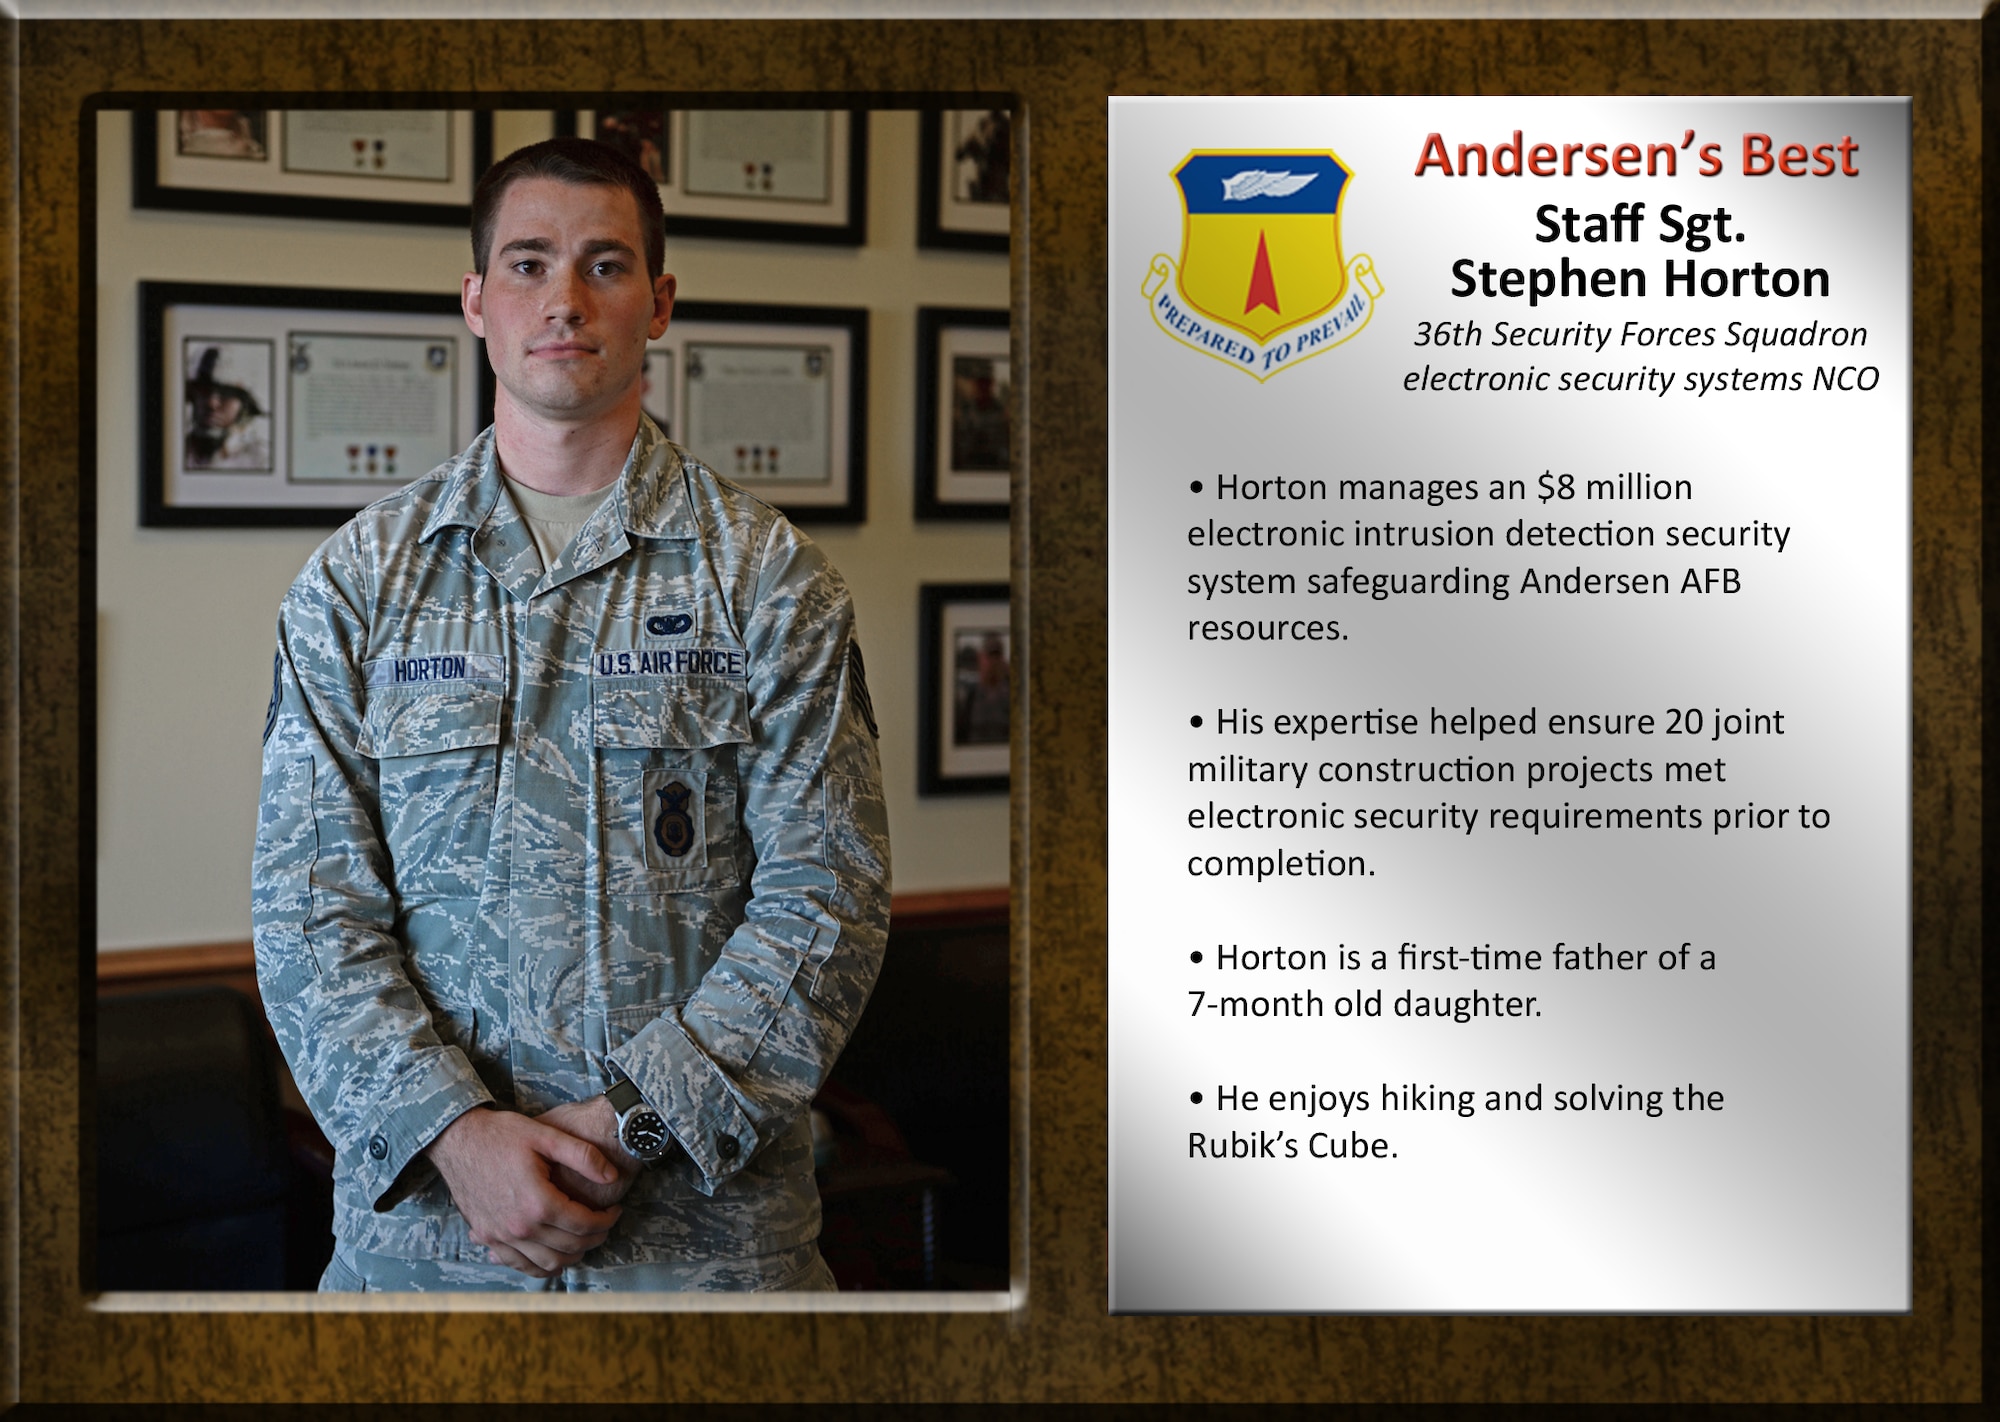 Team Andersen's Best recognizes Airmen and civilian professionals for outstanding contributions to mission and team success. As spotlight performers, individuals are chosen by base leaders for demonstrating the Air Force's core values of integrity first, service before self, and excellence in all we do.